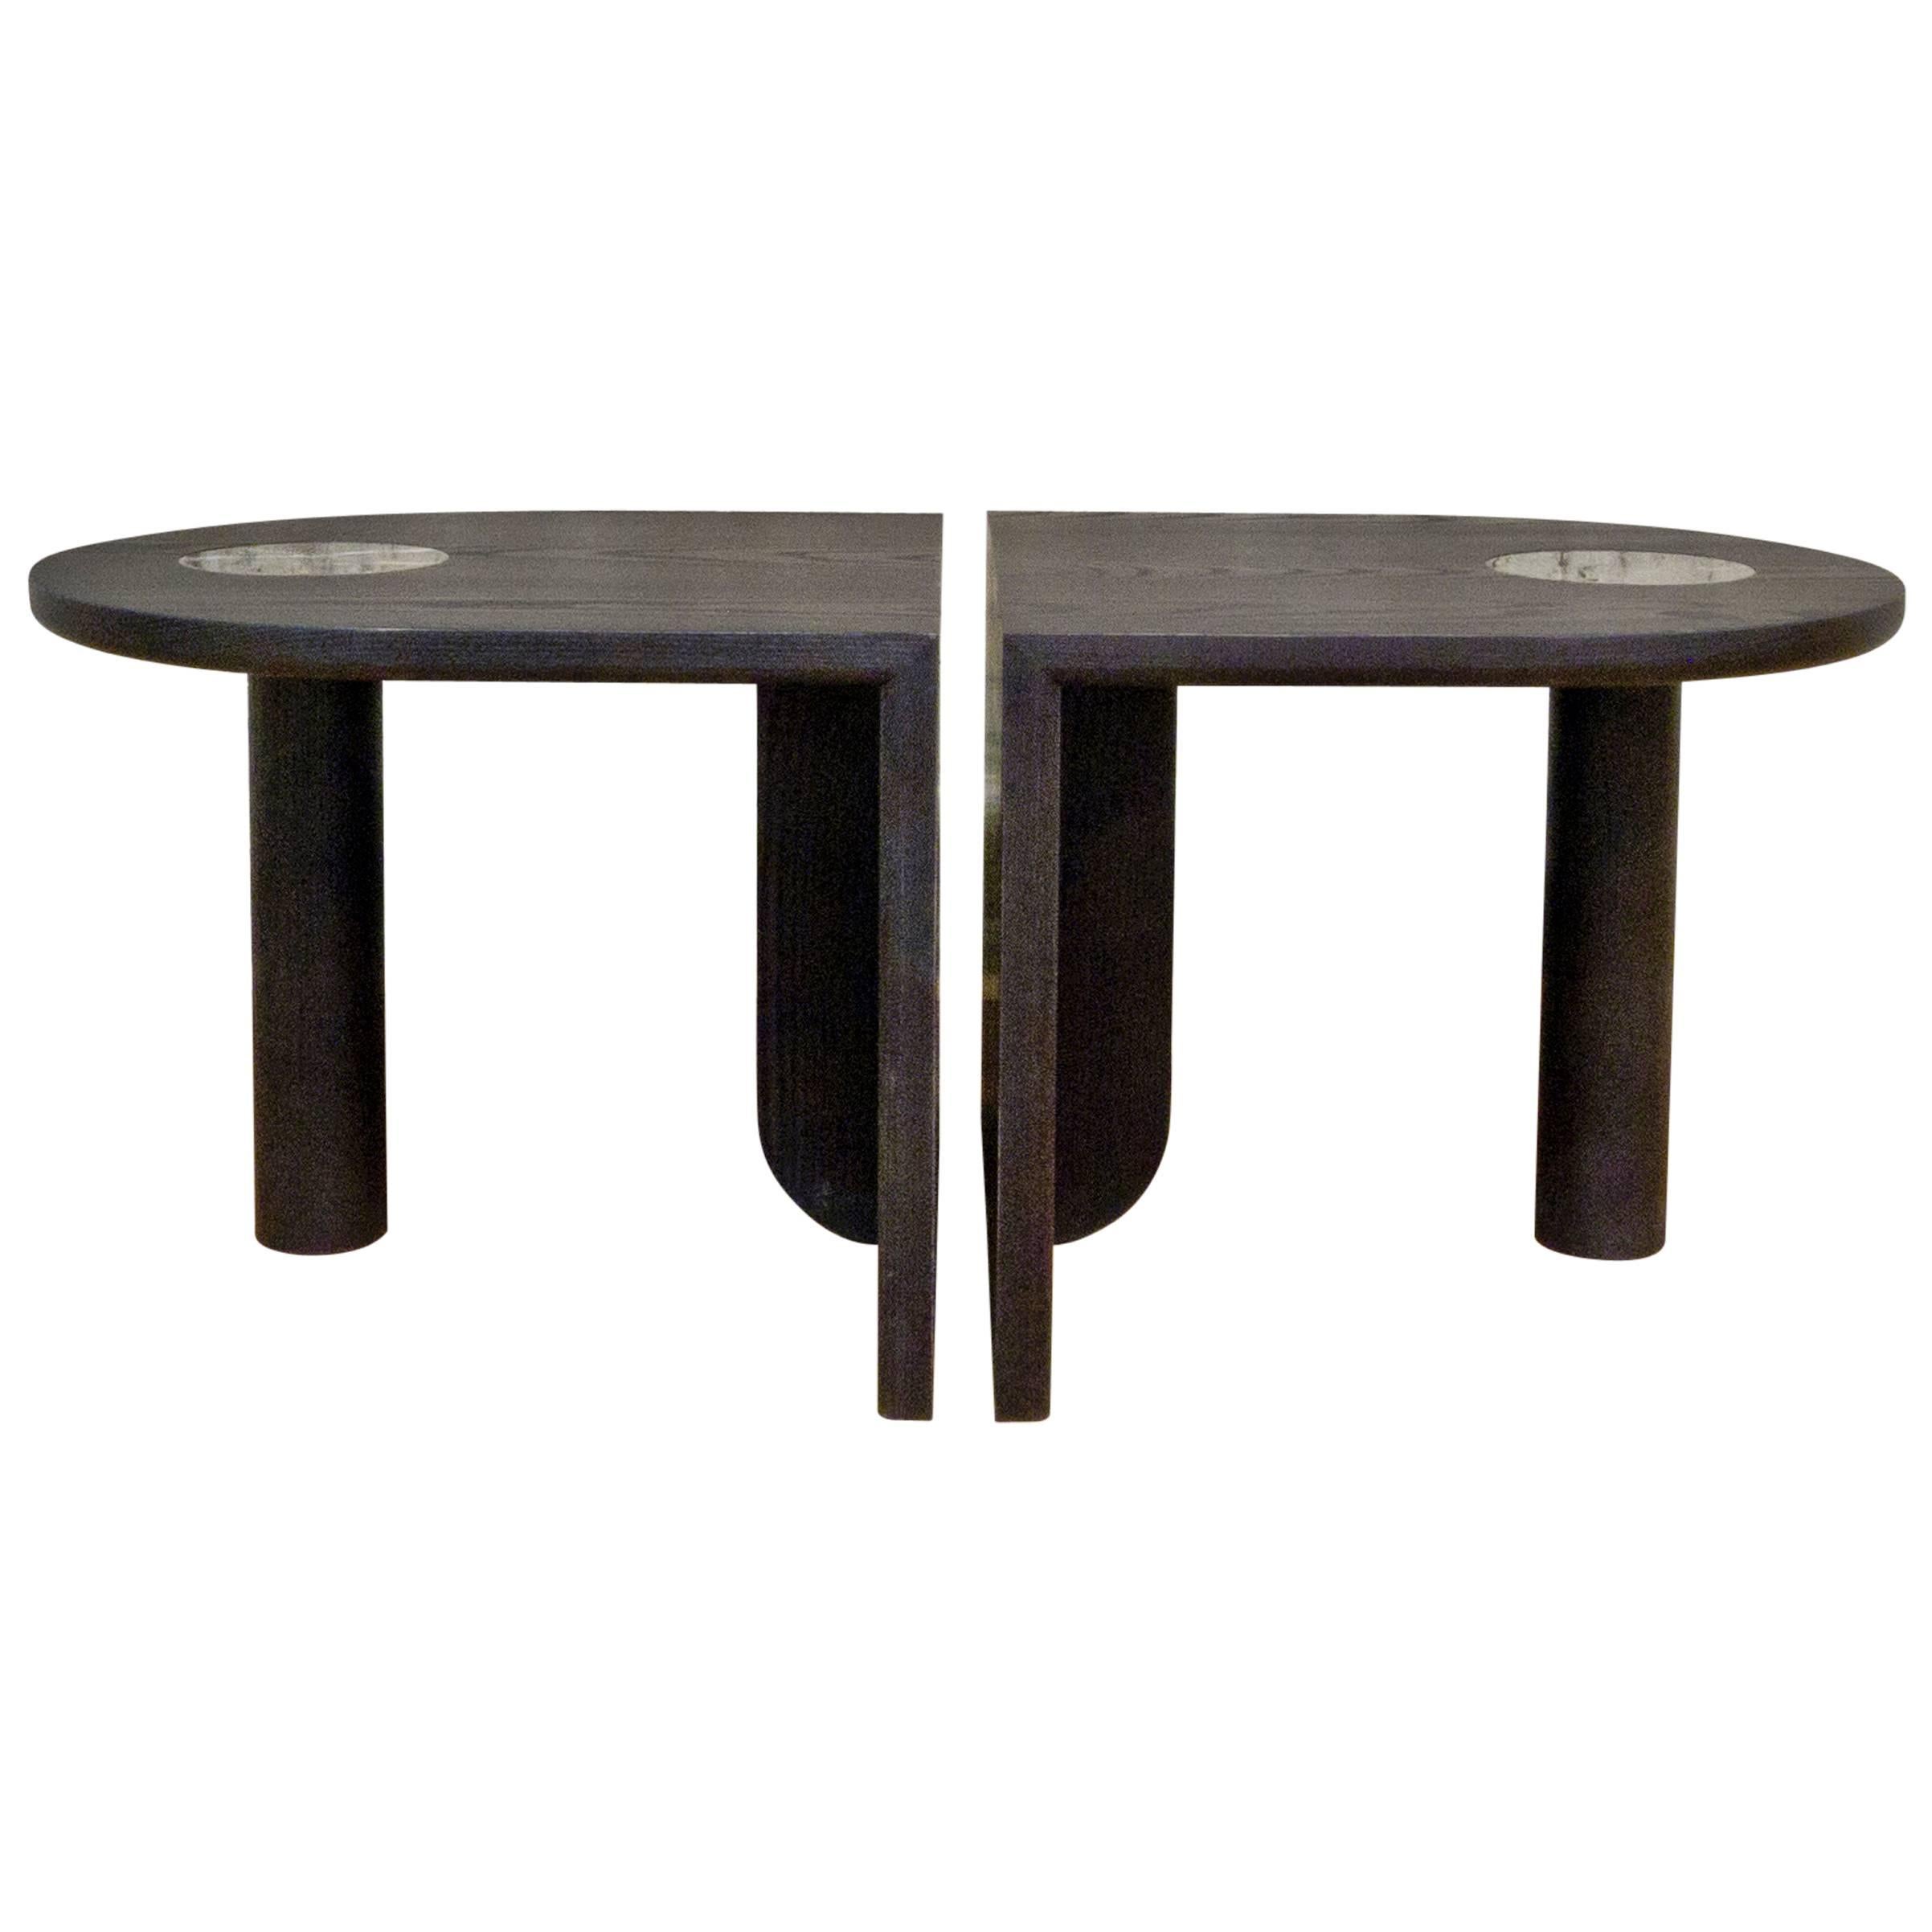 Pair of St. Charles Occasional Tables by Volk